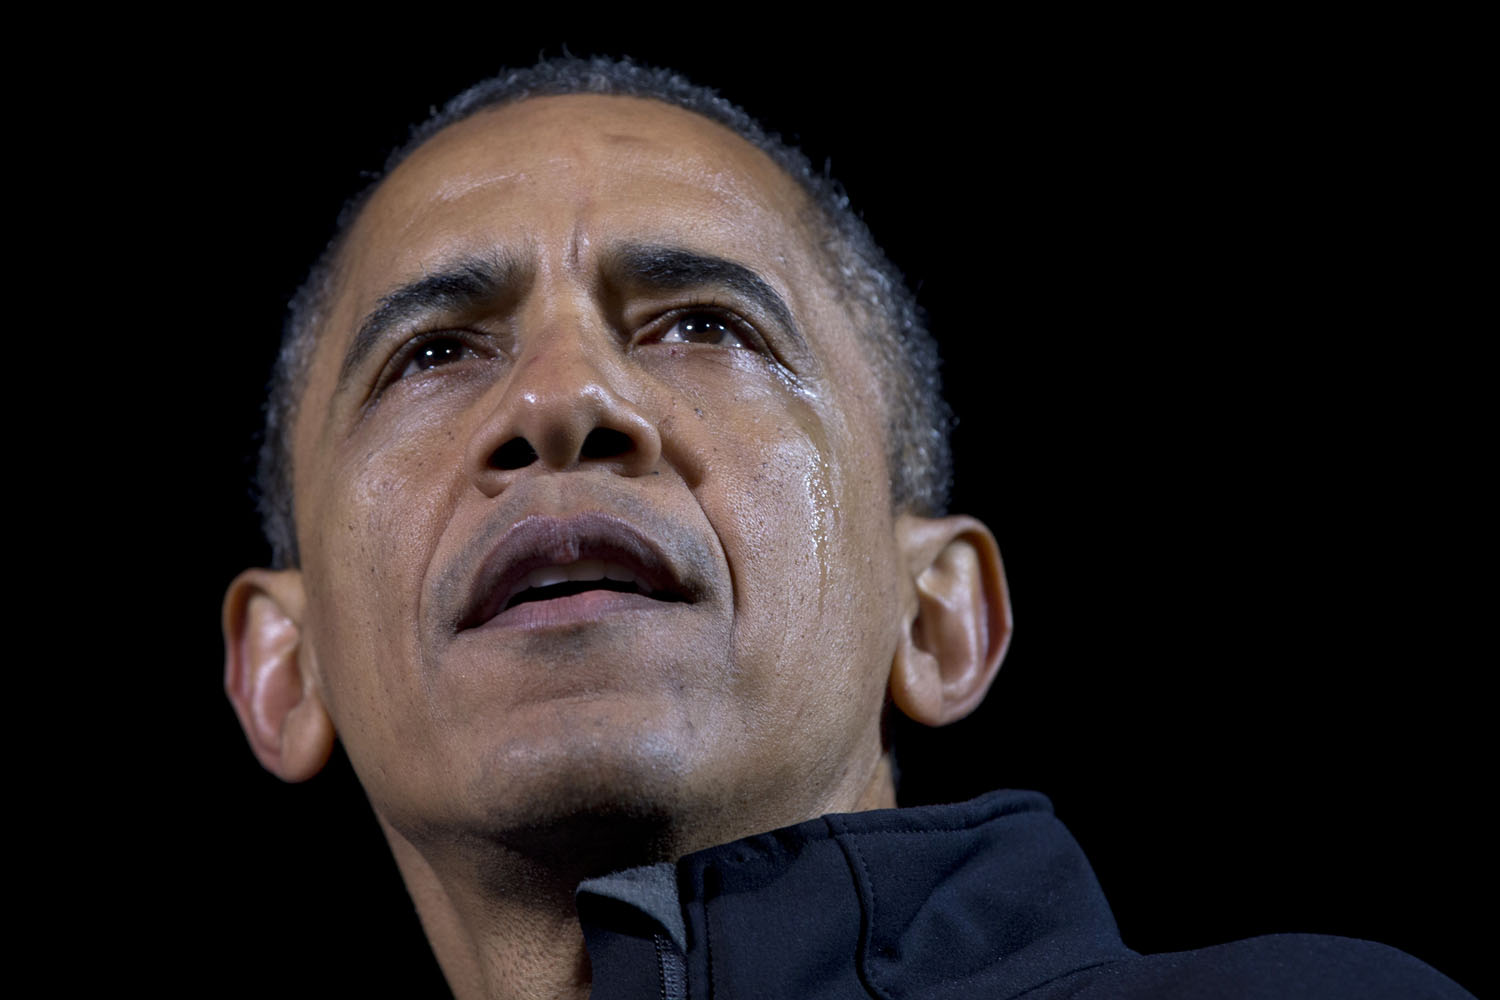 Image: Nov. 5, 2012. President Obama speaks, as a tear streams down his face, at his final campaign stop on the evening before the 2012 presidential election in Des Moines.